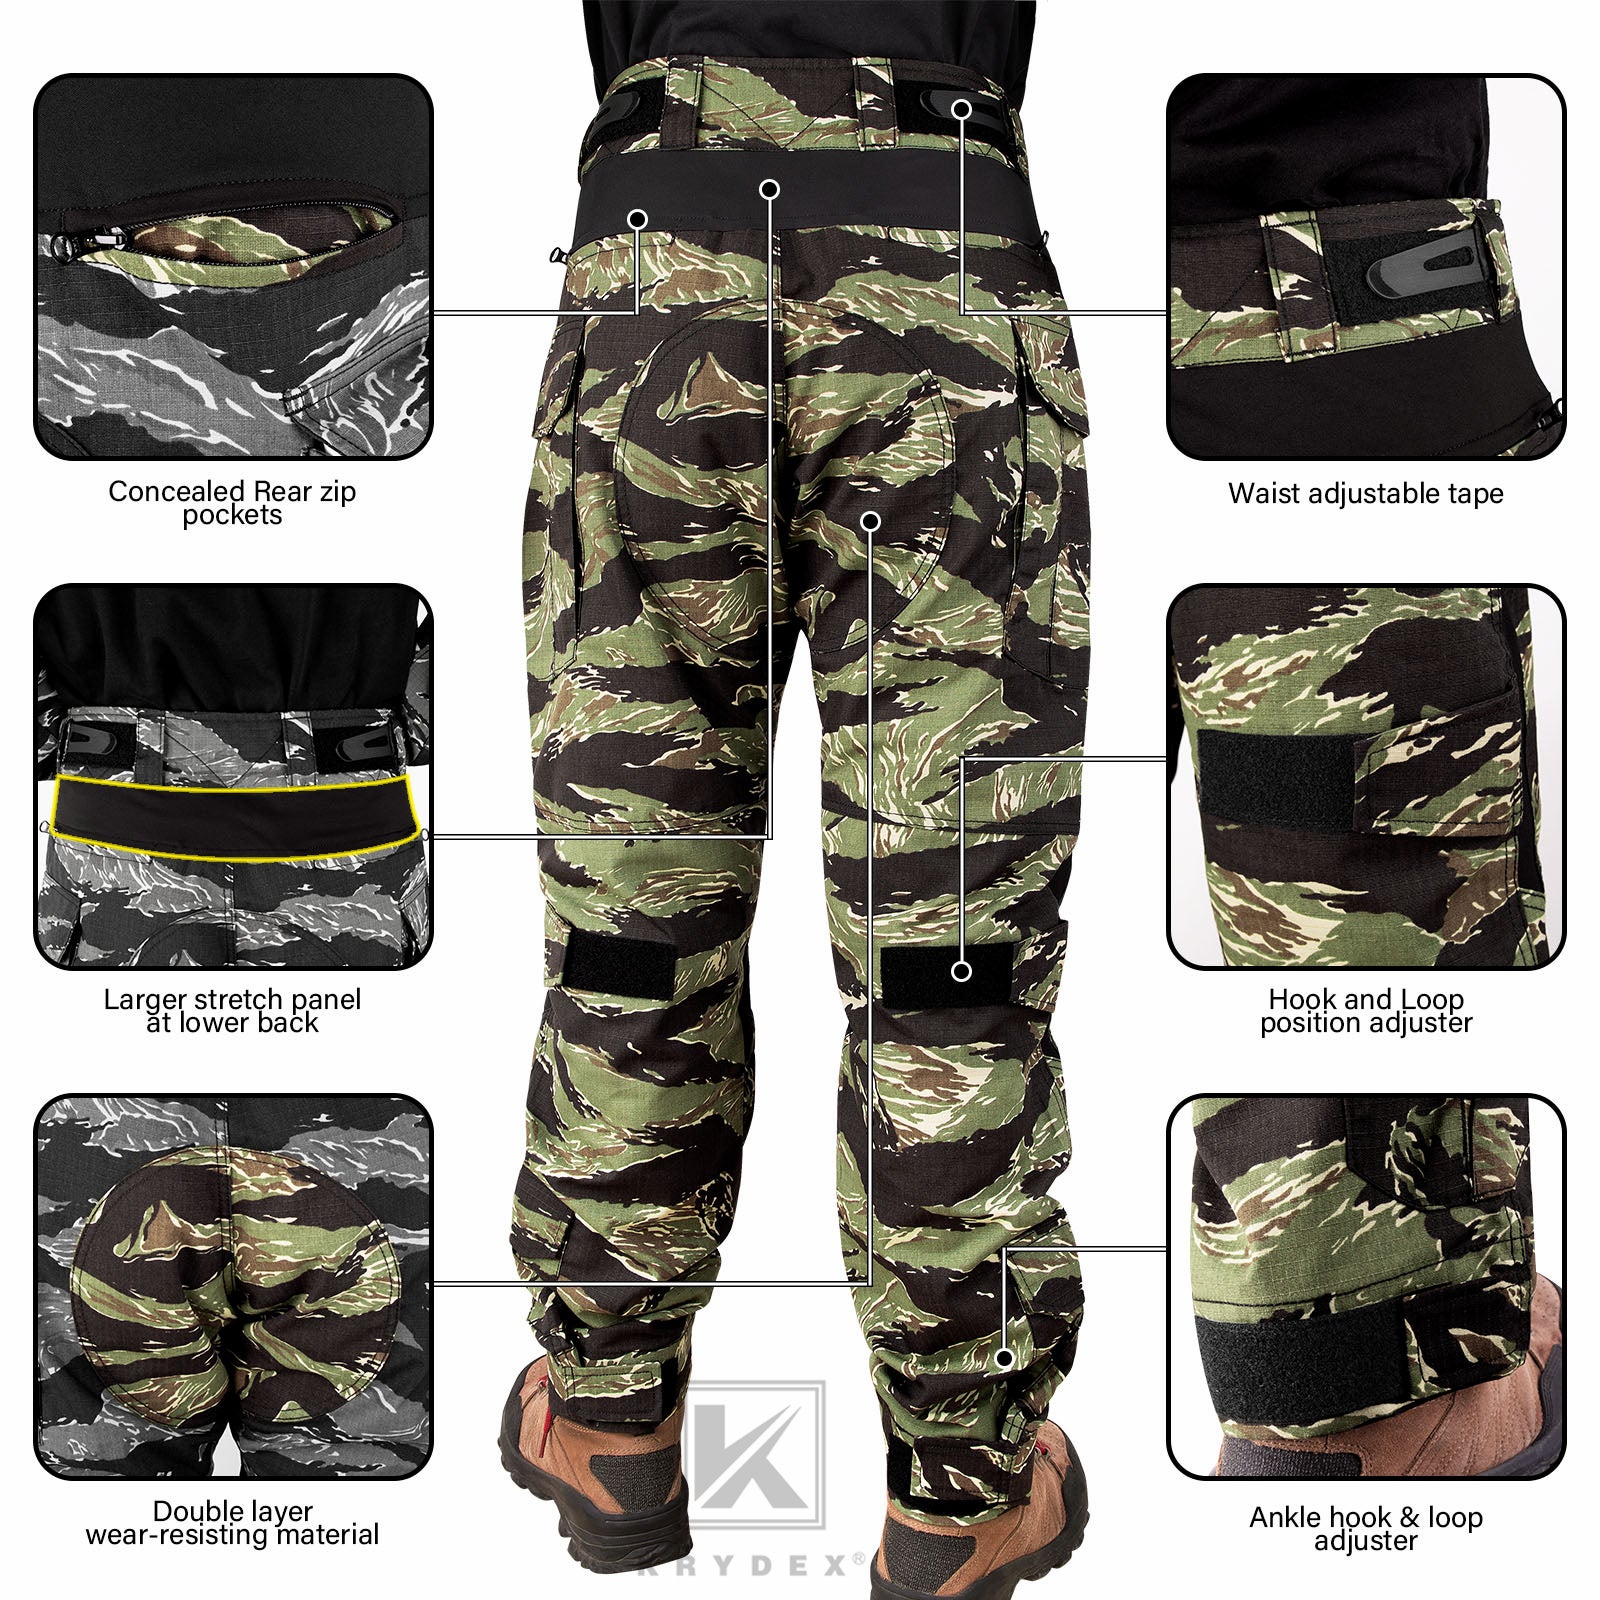 TQWQT Camo Cargo Pants for Men Relaxed Fit Cotton Casual Work Hiking Pants  Mens Tactical Military Army Pants with Multi Pockets Army Green M -  Walmart.com